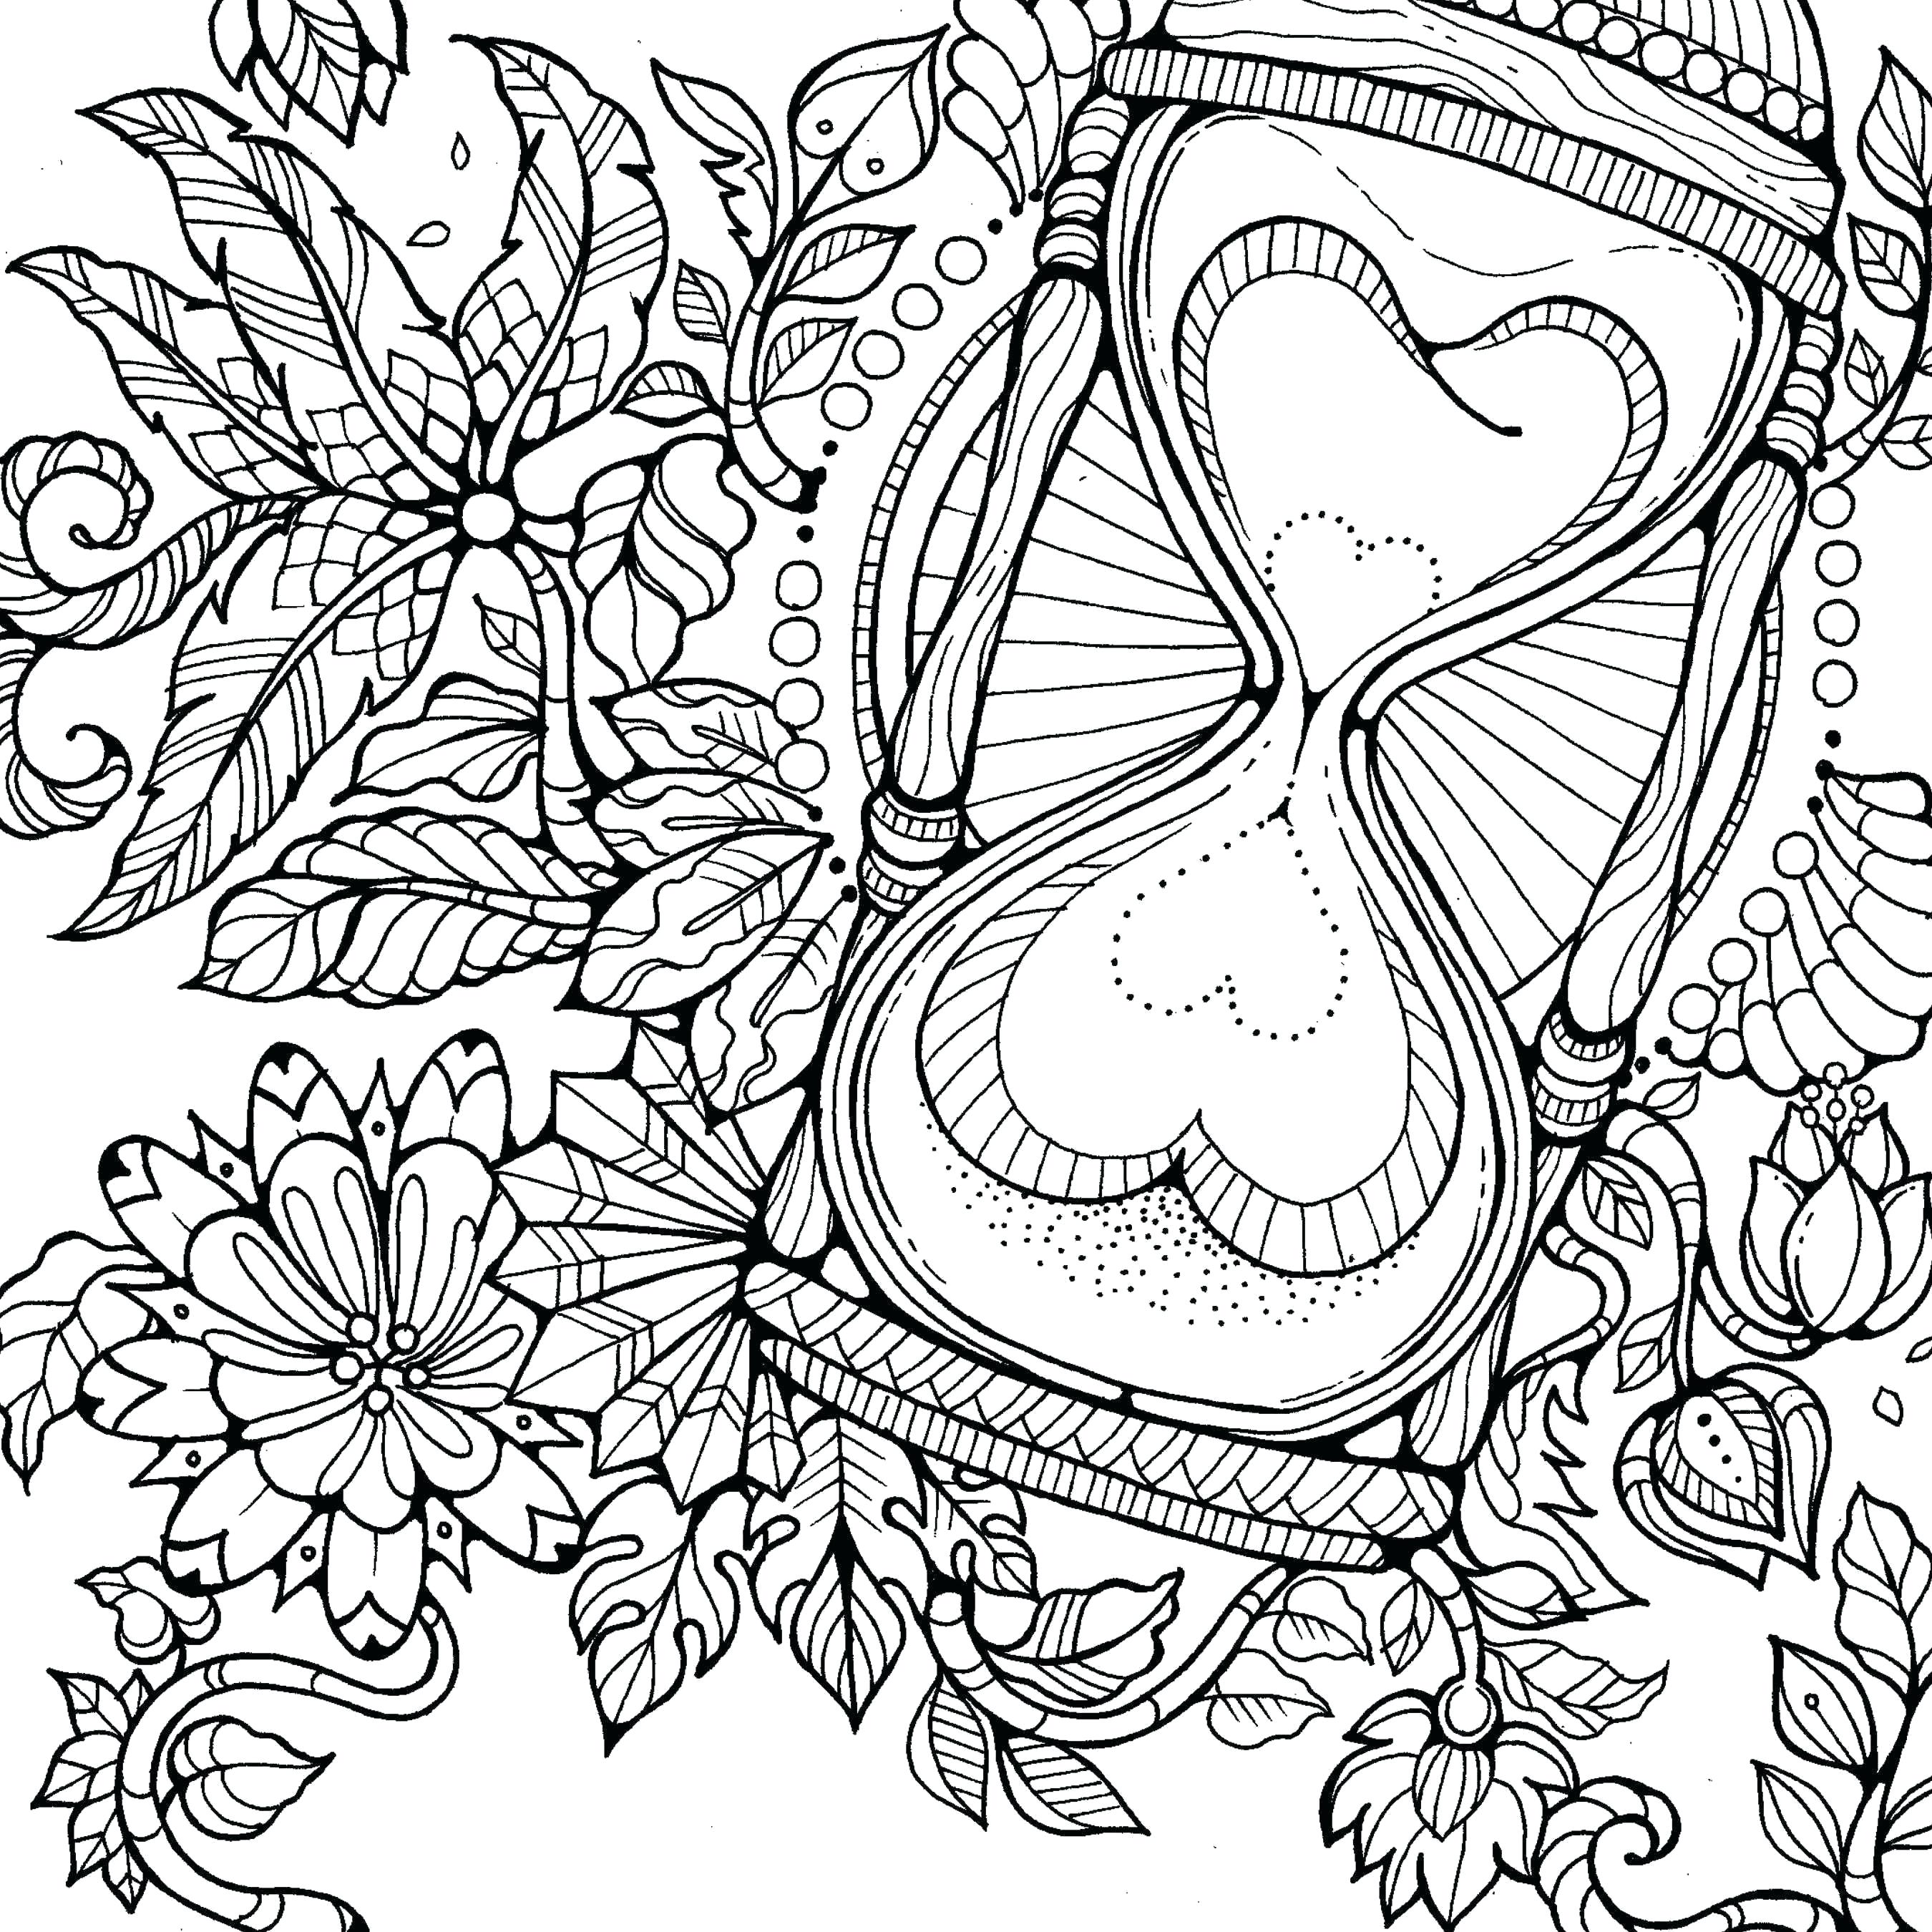 Worksheets Coloring Pages - Coloring Home